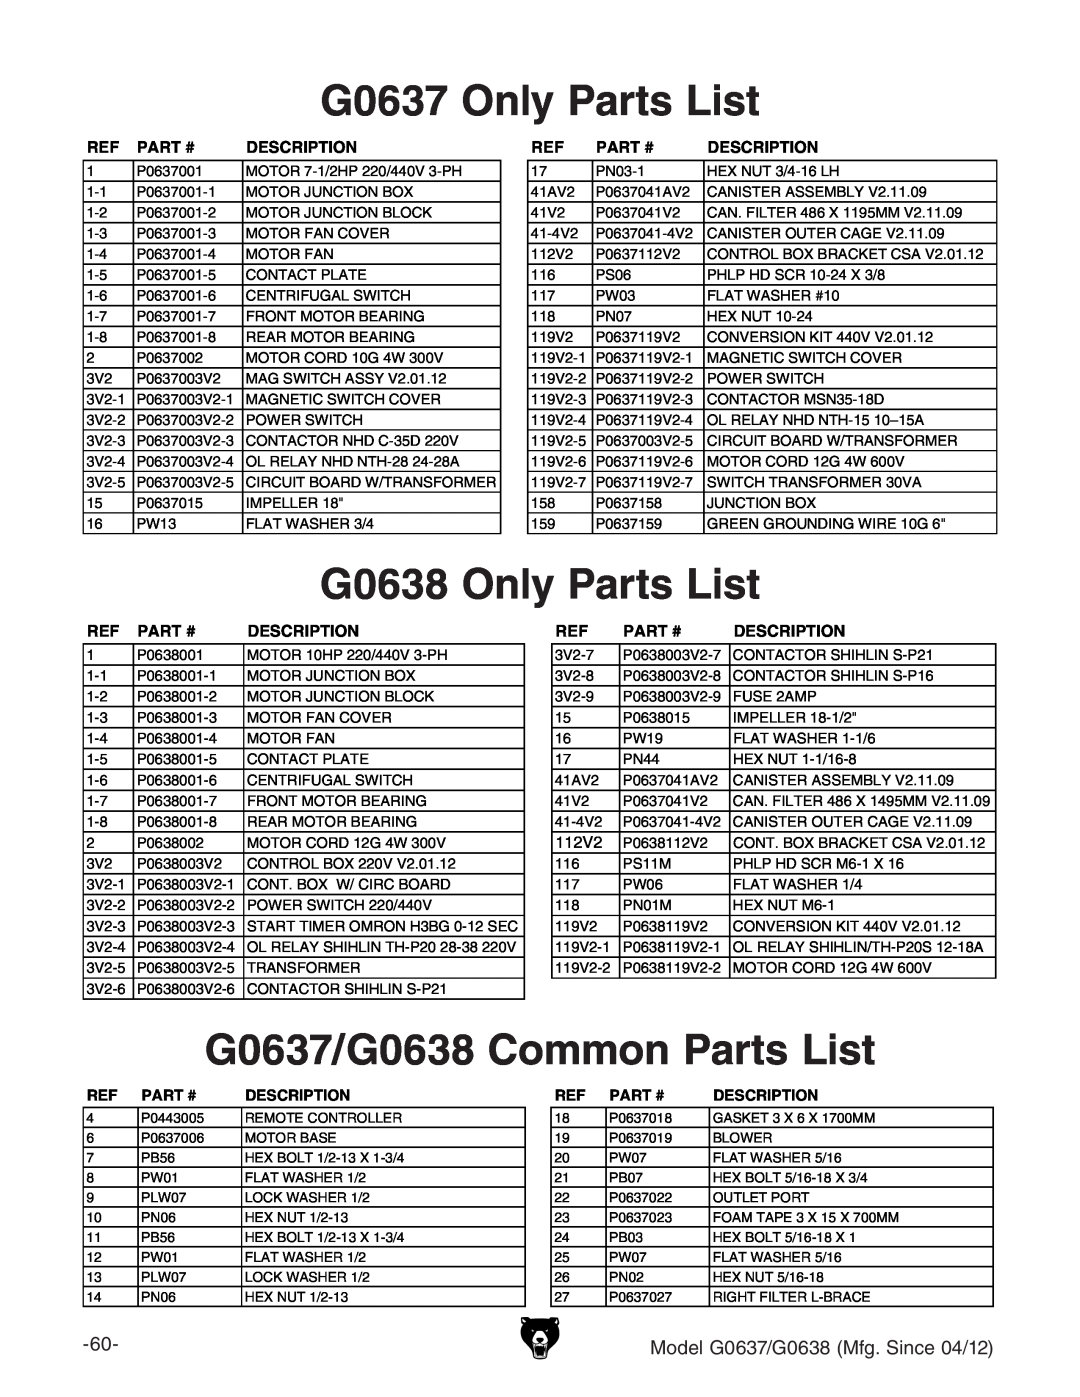 Grizzly owner manual G0637 Only Parts List, G0638 Only Parts List, G0637/G0638 Common Parts List 